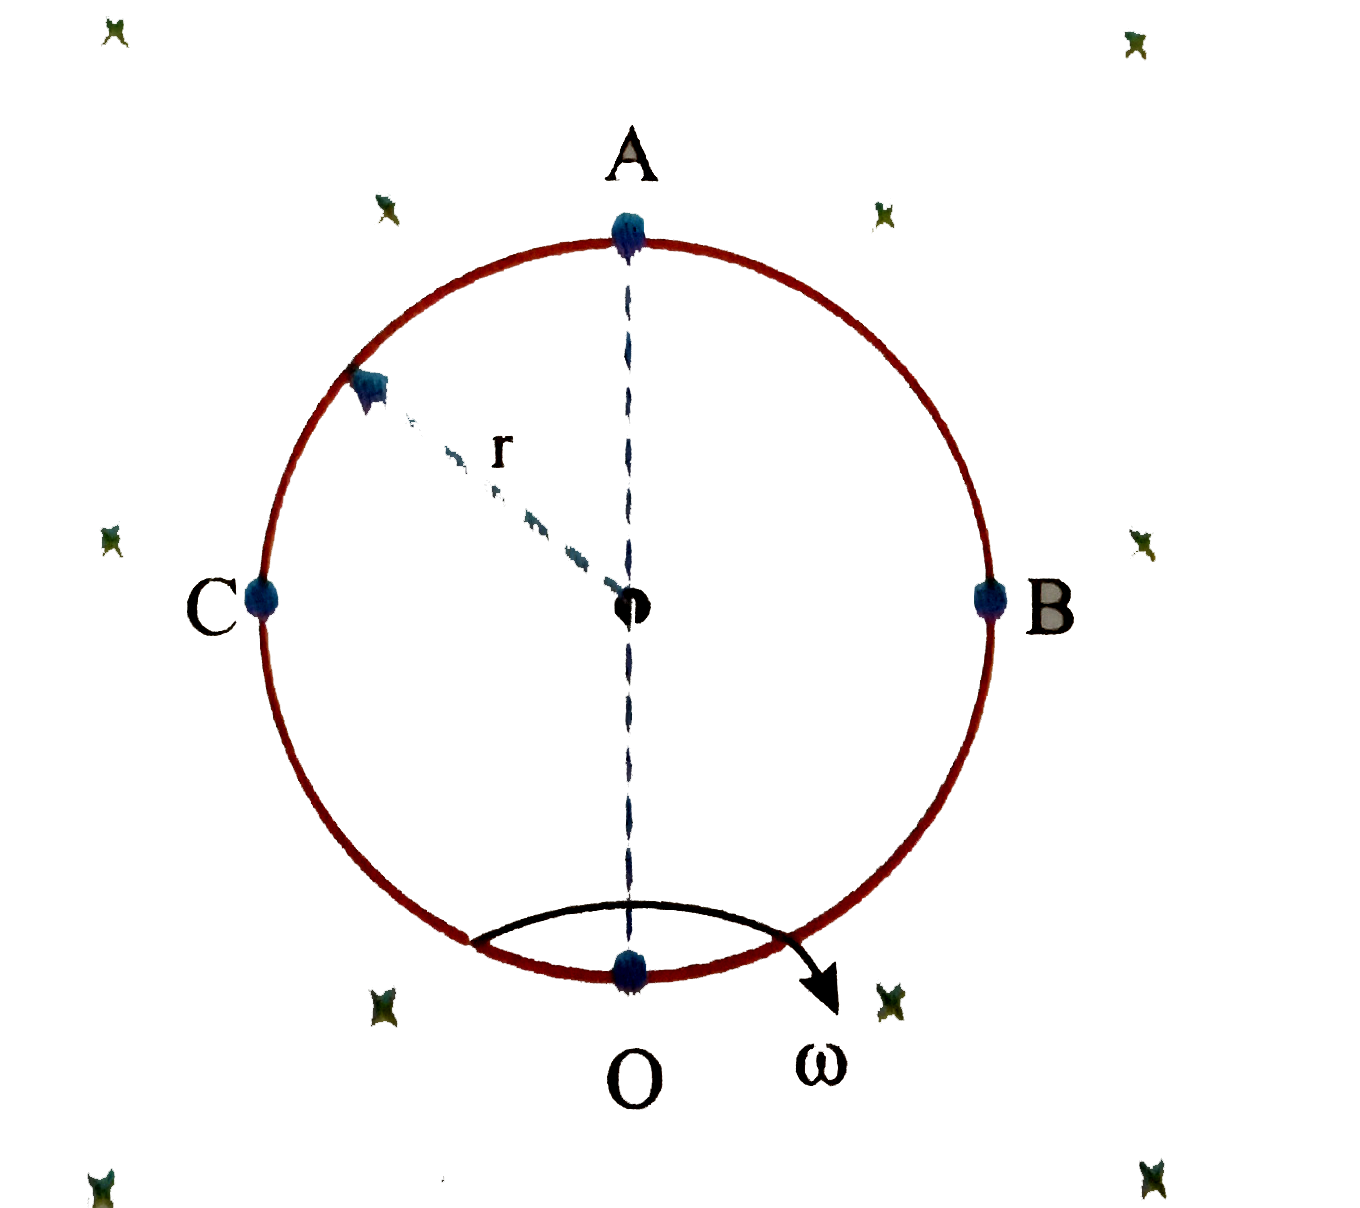 In figure, there is  conducting ring having resistance R placed in the plane of paper in a uniform magnetic field B(0). If the rings is rotating in the plane of paper about an axis passing through point O and perpendicular to the plane of paper with constant angular speed omega in clockwise direction, then